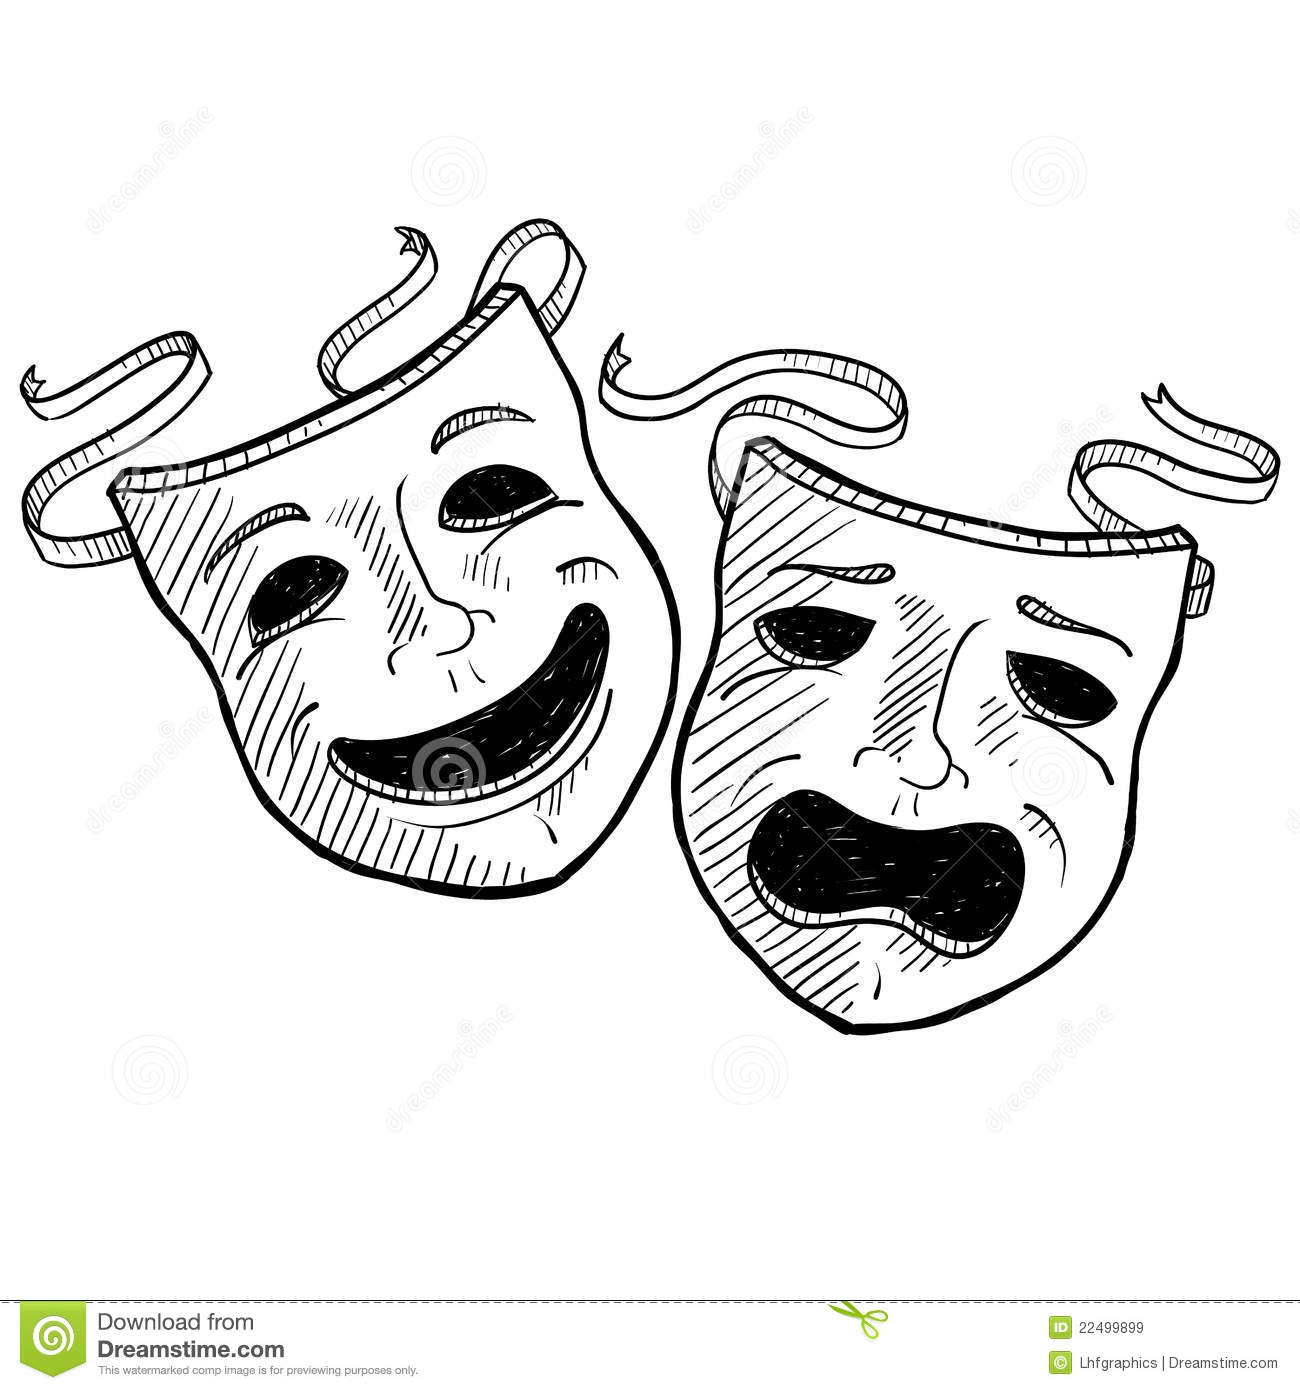 Doodle Style Drama Or Theater Masks Illustration In Vector Format